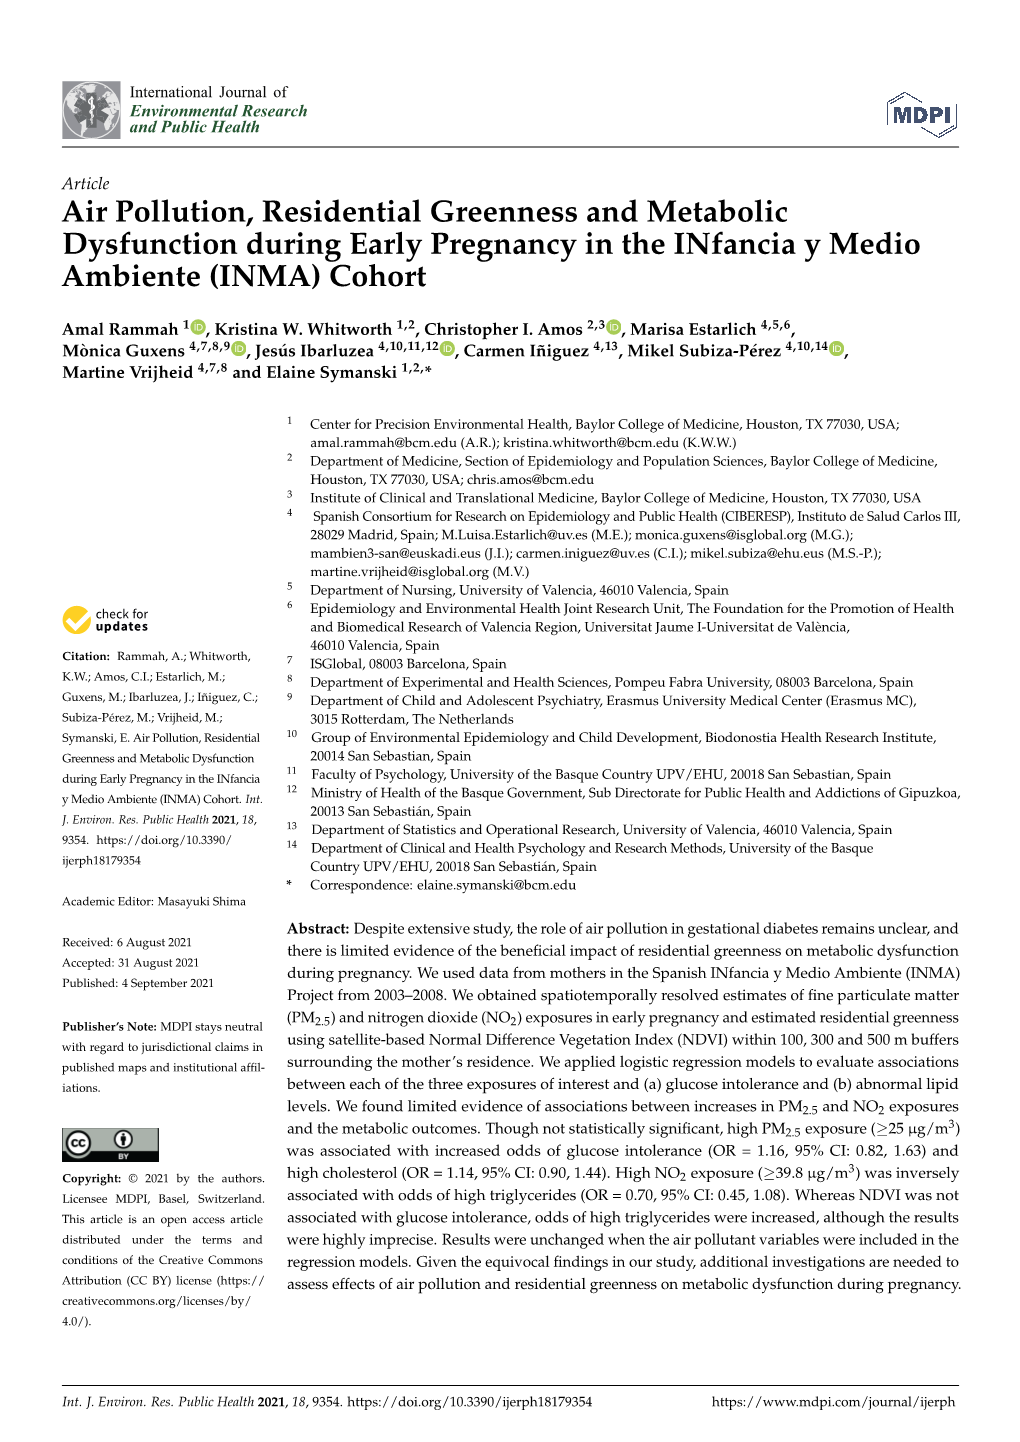 Air Pollution, Residential Greenness and Metabolic Dysfunction During Early Pregnancy in the Infancia Y Medio Ambiente (INMA) Cohort